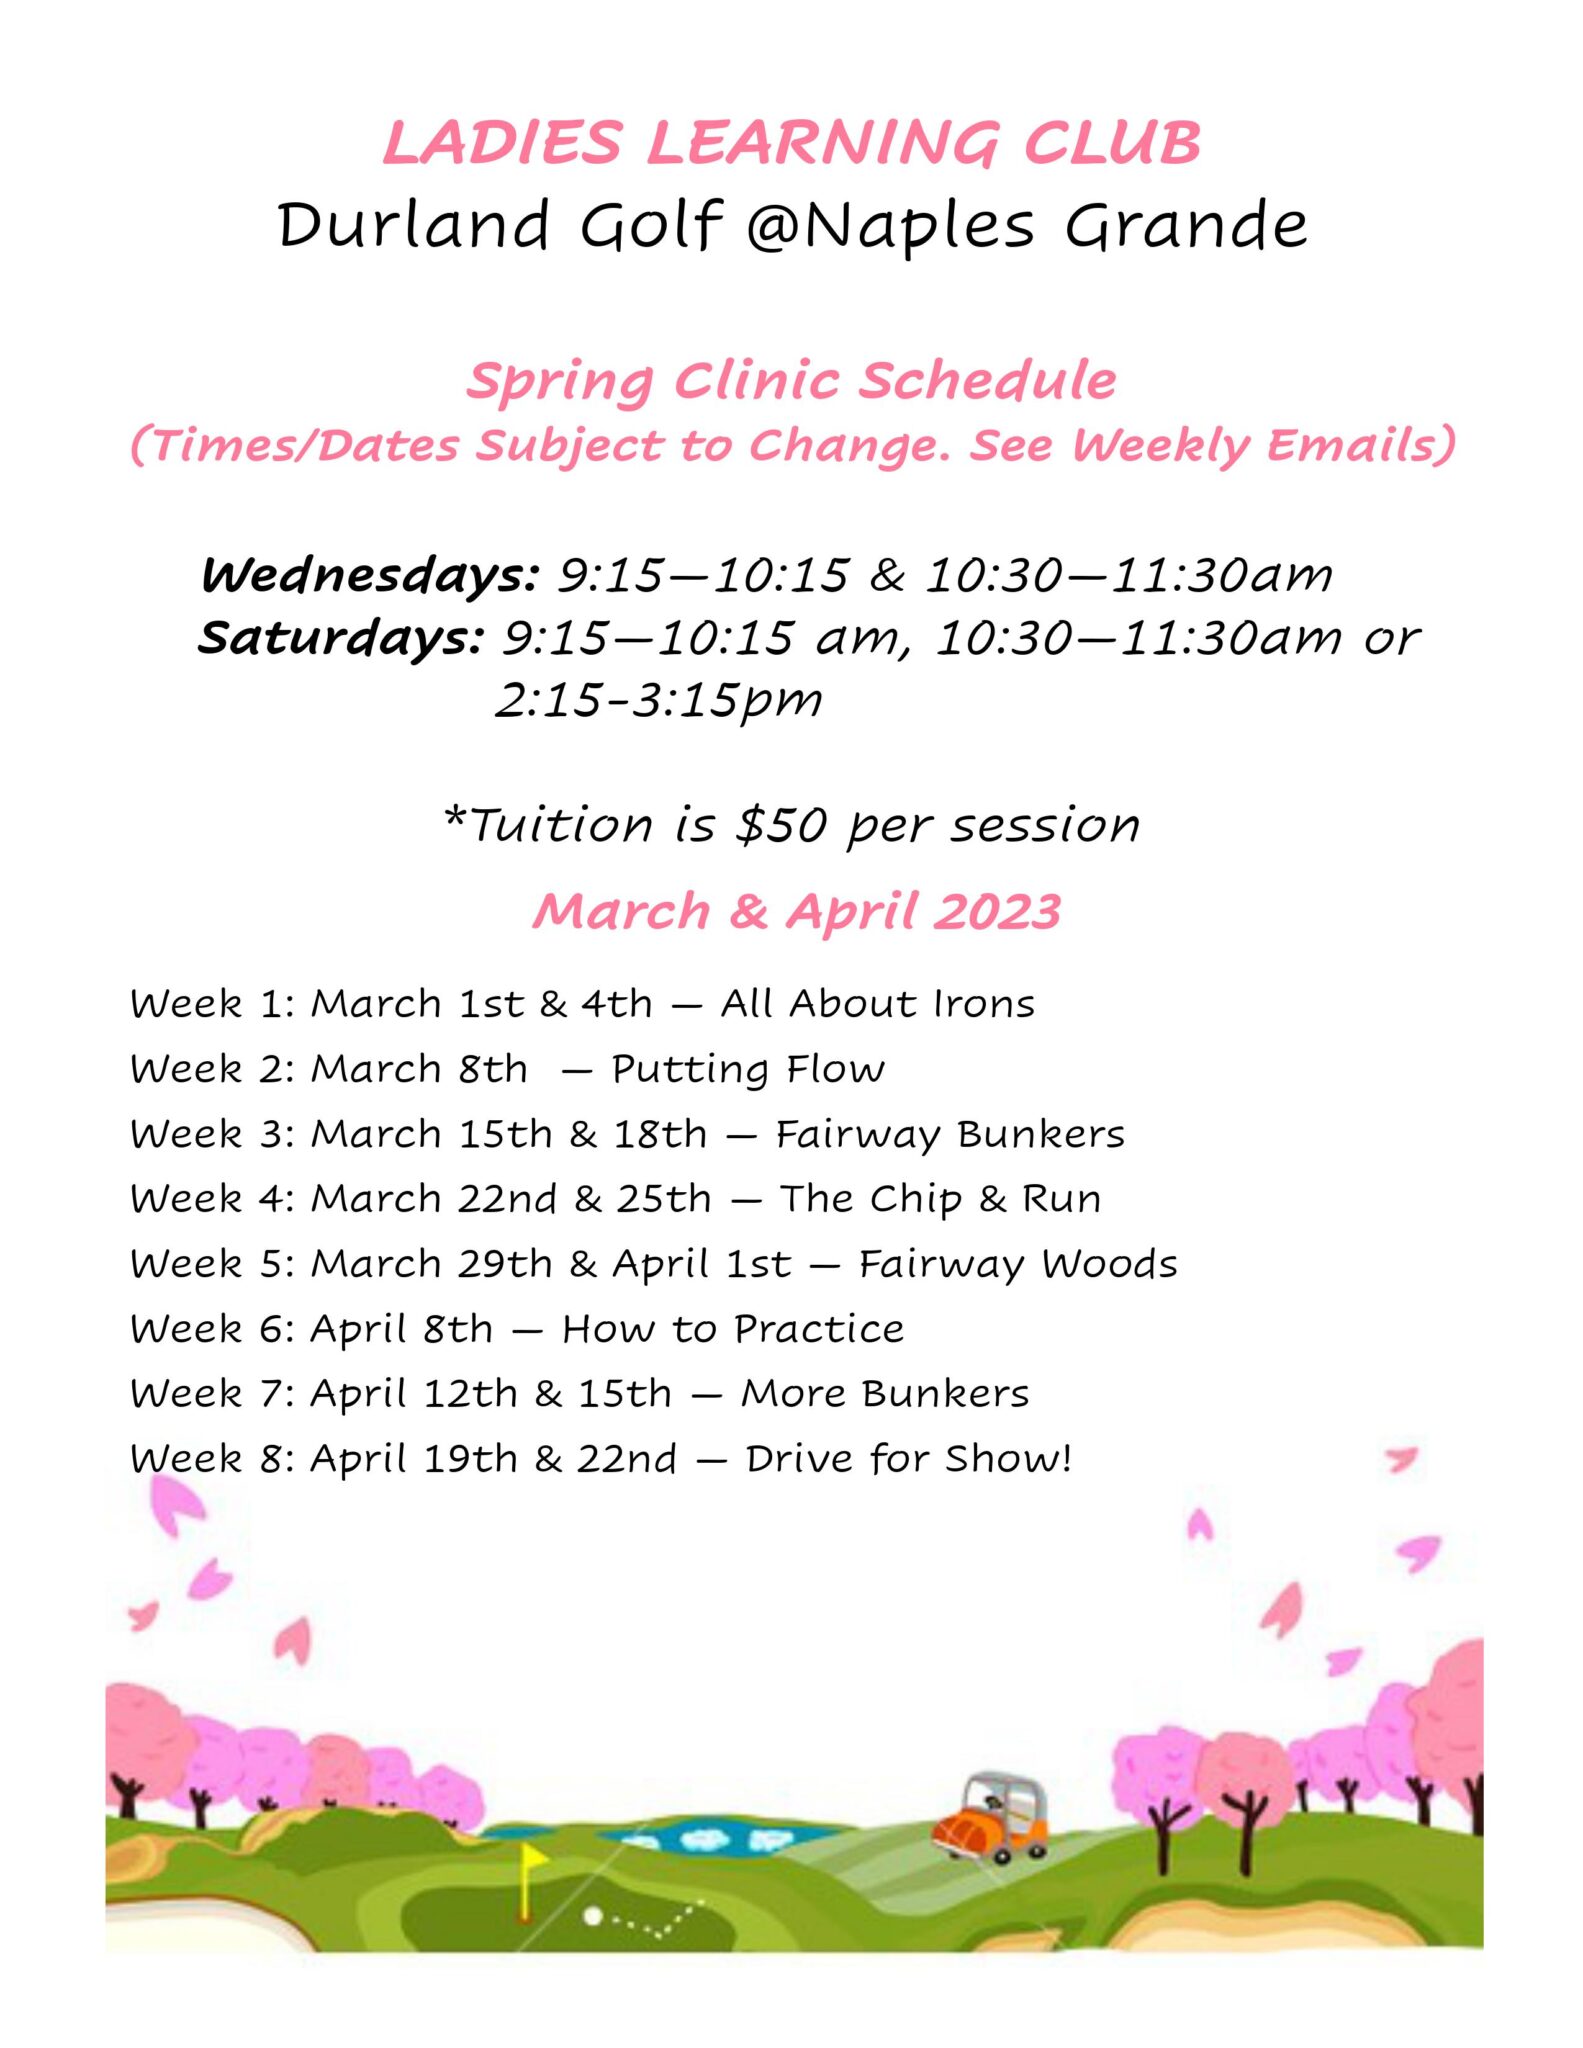 Ladies Learning Club March & April 2023